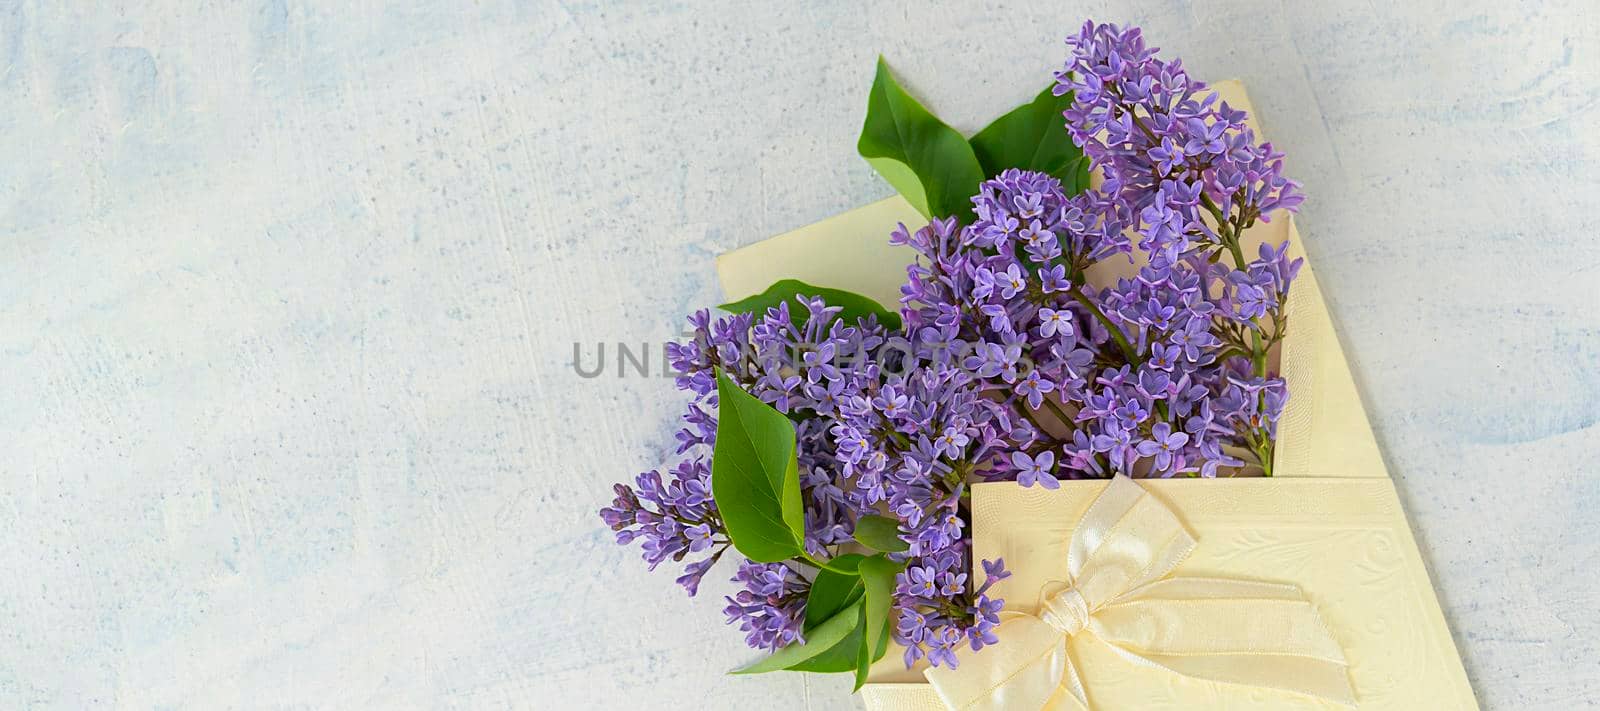 banner with Very Peri color lilac flowers in festive envelope with bow on textured background. the concept of summer, spring, nature bloom, holiday and congratulations. copy space. flat lay. top view